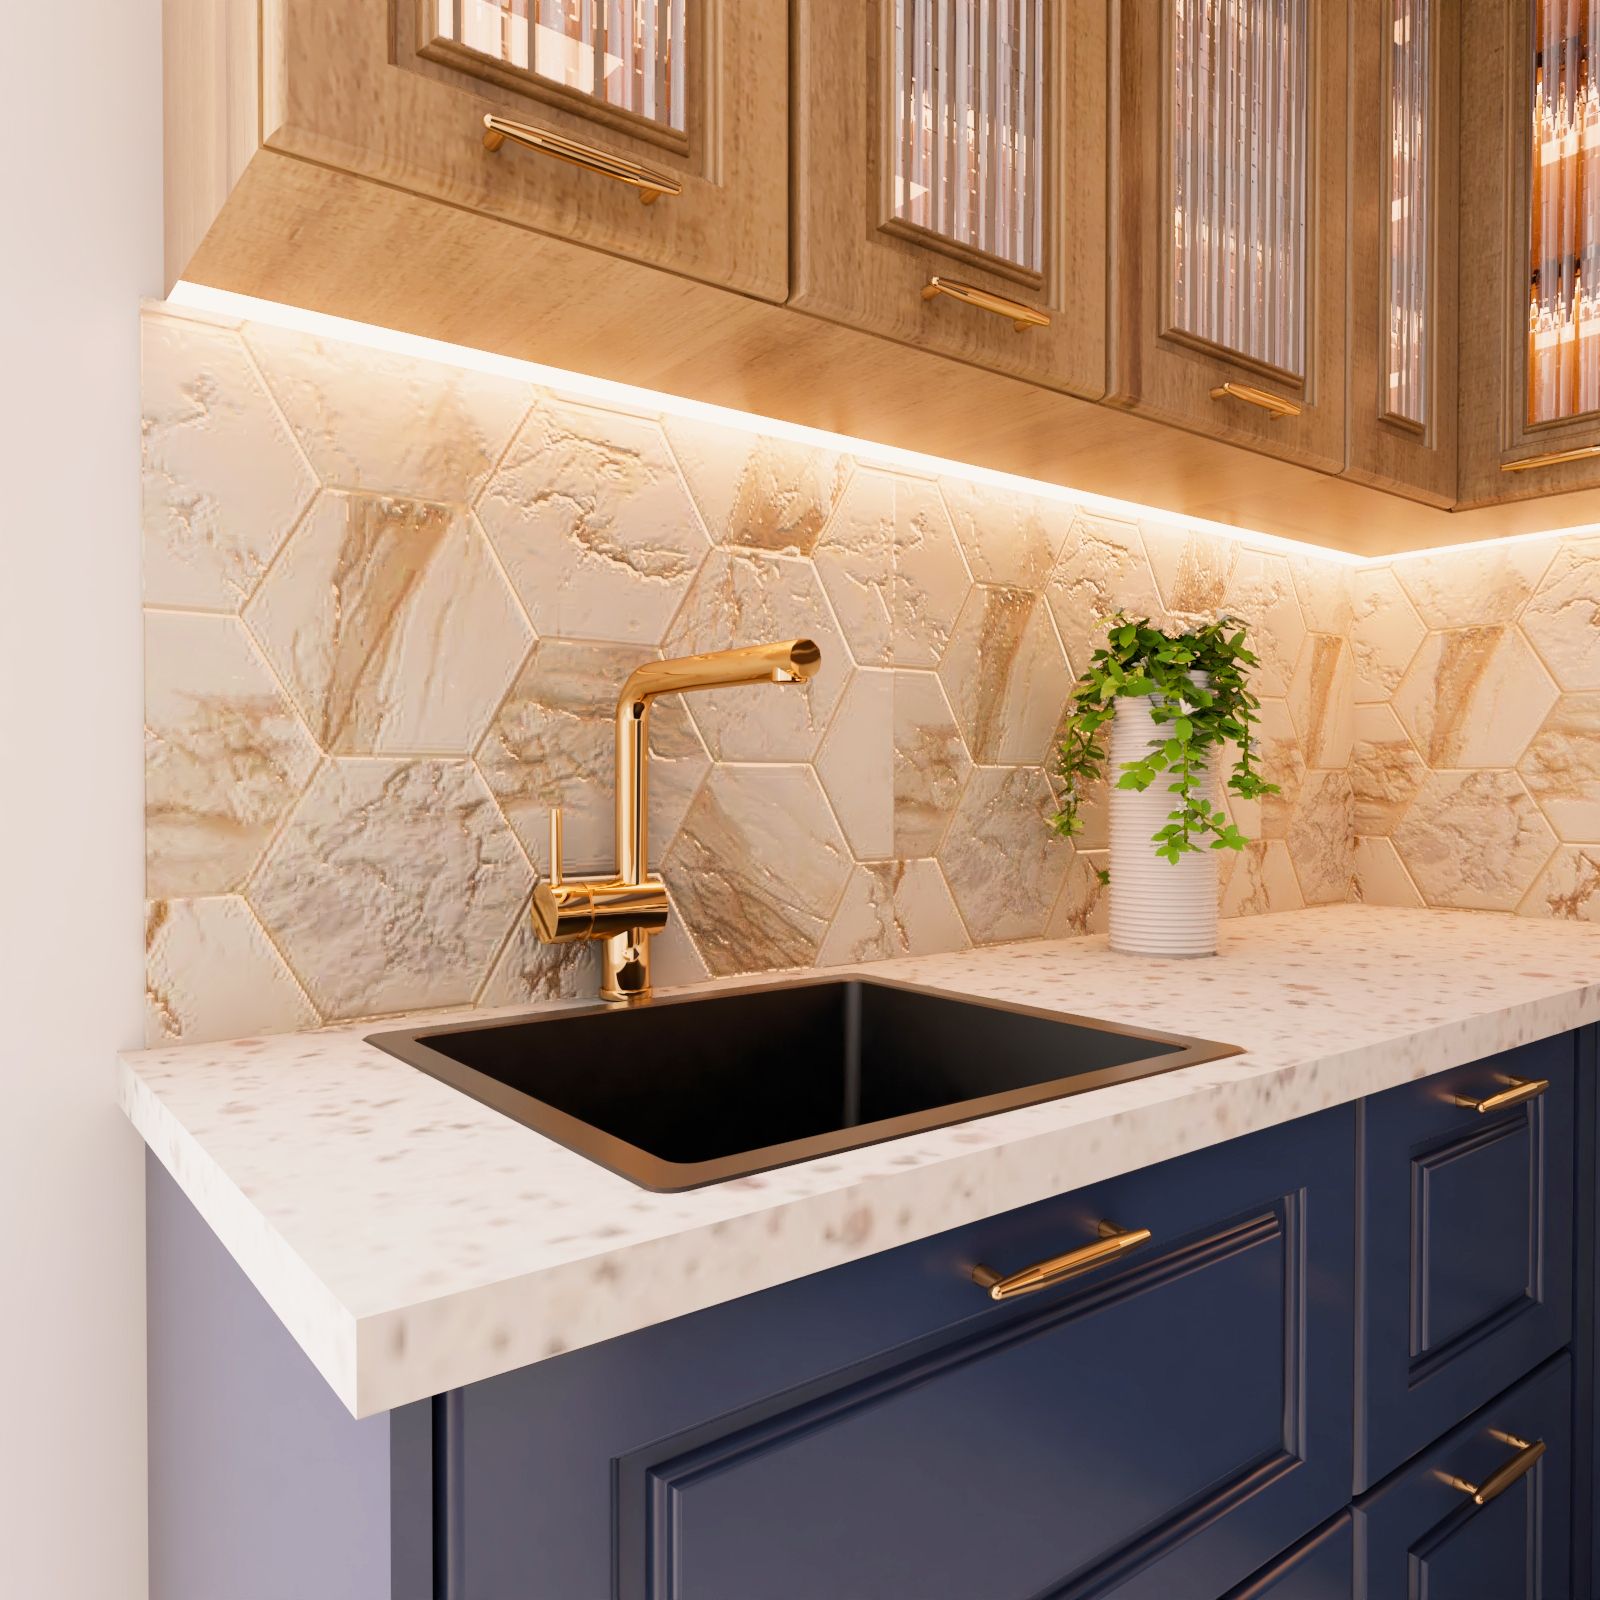 Rectangular undermount quartz basin wash with brass fittings and blue kitchen cabinets - Livspace